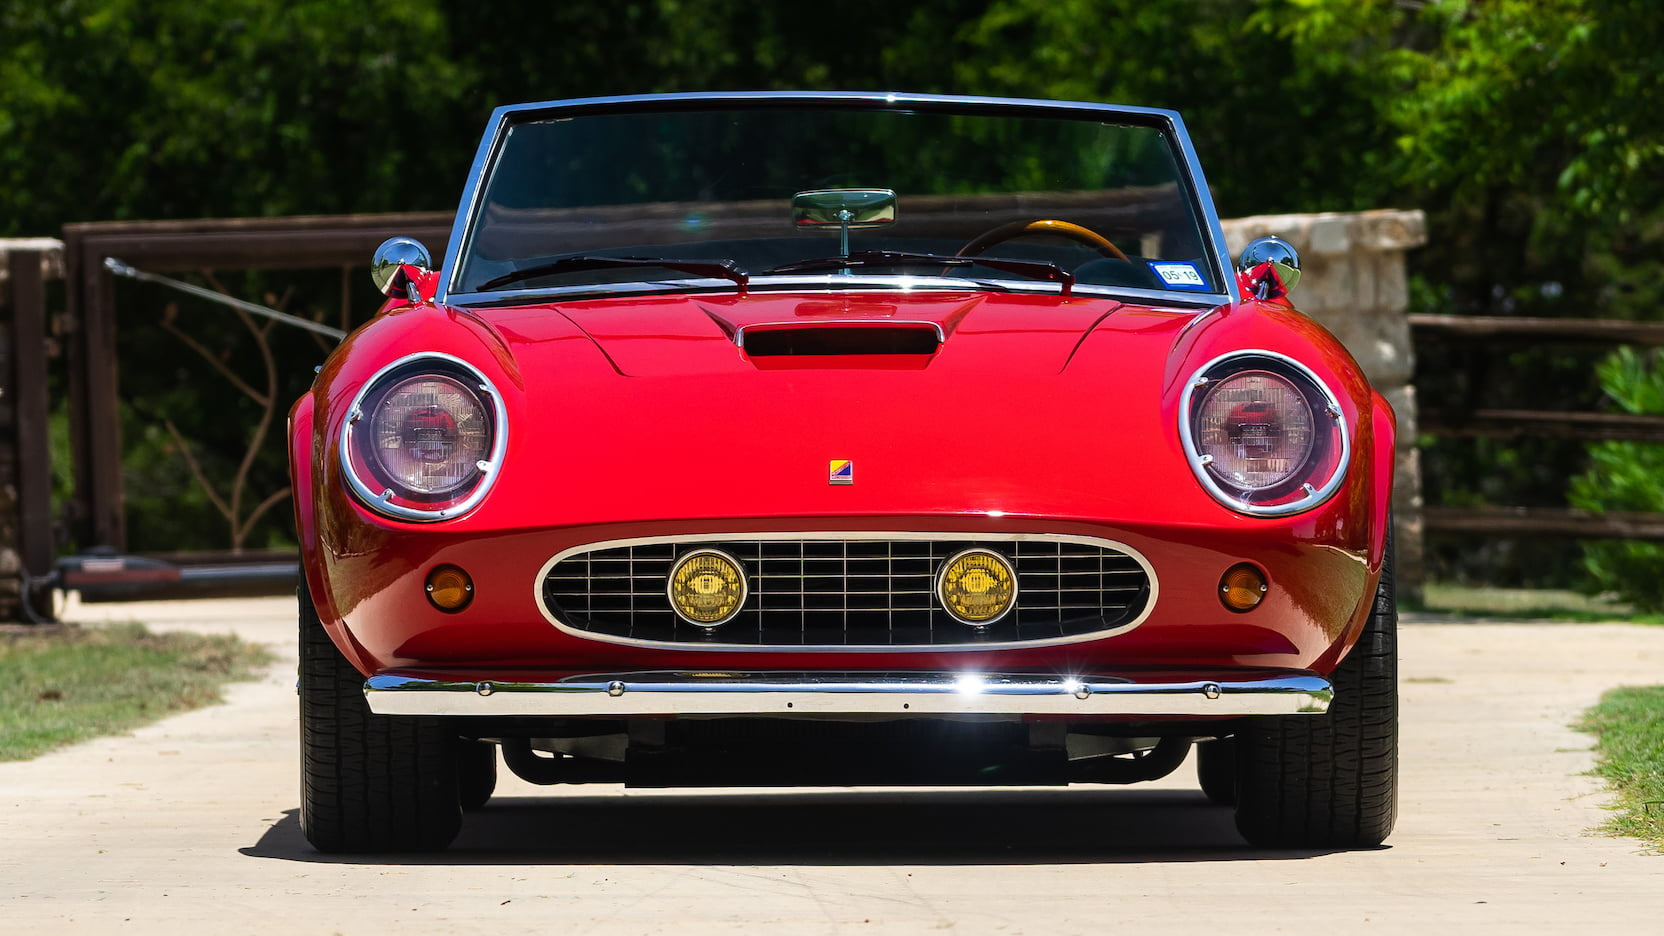 This "Ferrari" -- actually a Modena GT Spyder California -- will be on the Mecum auction block during Monterey Car Week. | Mecum photo